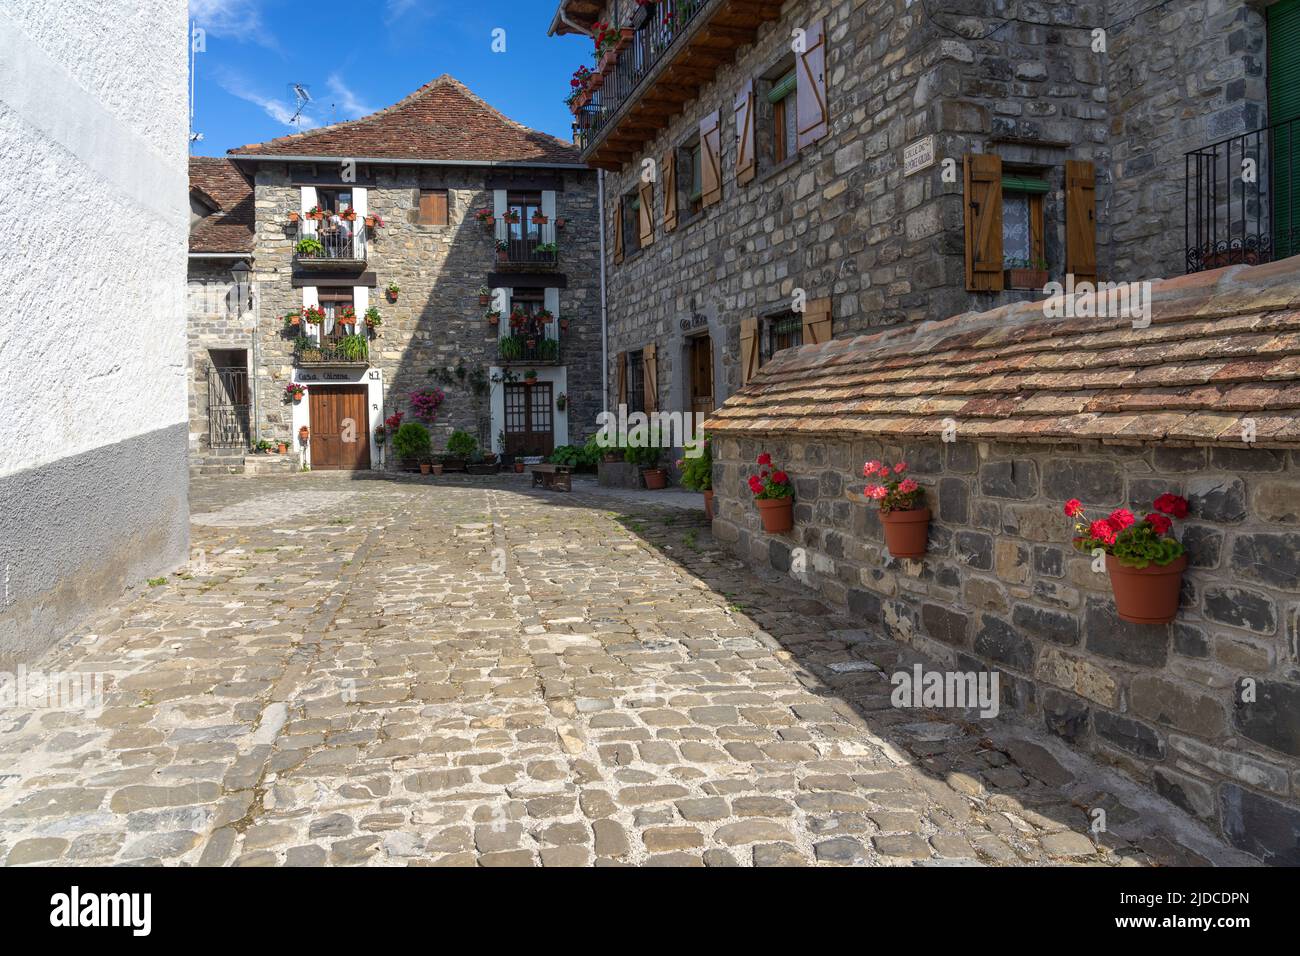 Old town of the beautiful village of Ansó, Pyrenees region, Huesca, Aragon, Spain. Stock Photo